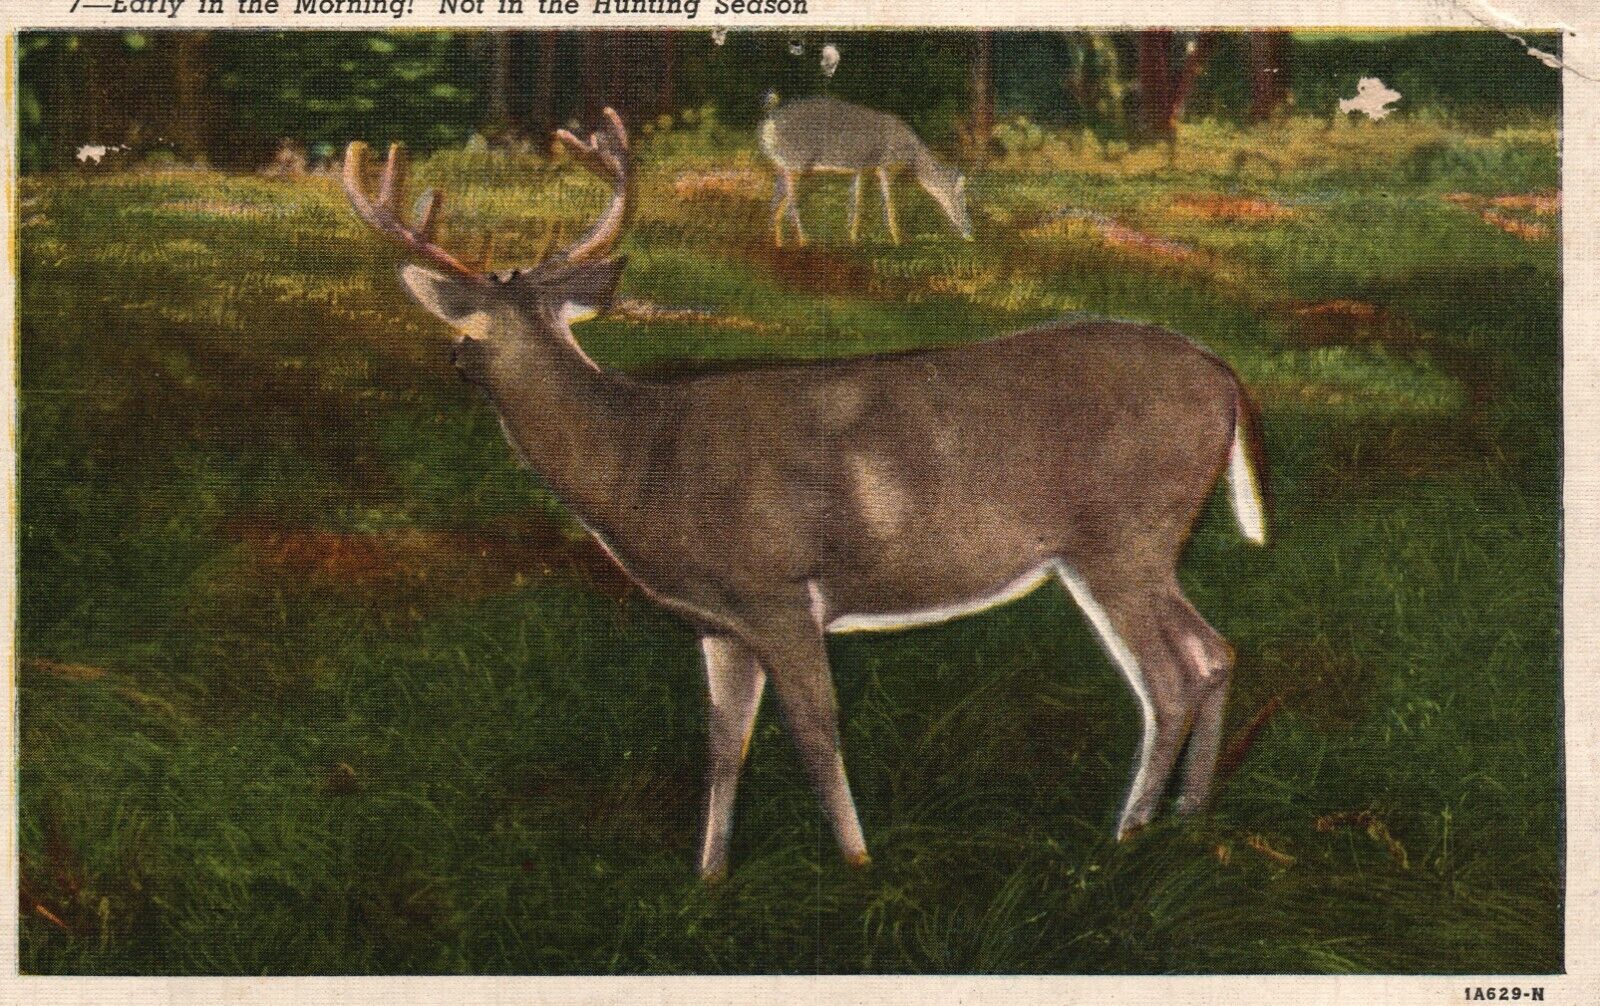 Vintage Postcard 1930\'s Early in the Morning Not in the Hunting Season Deer